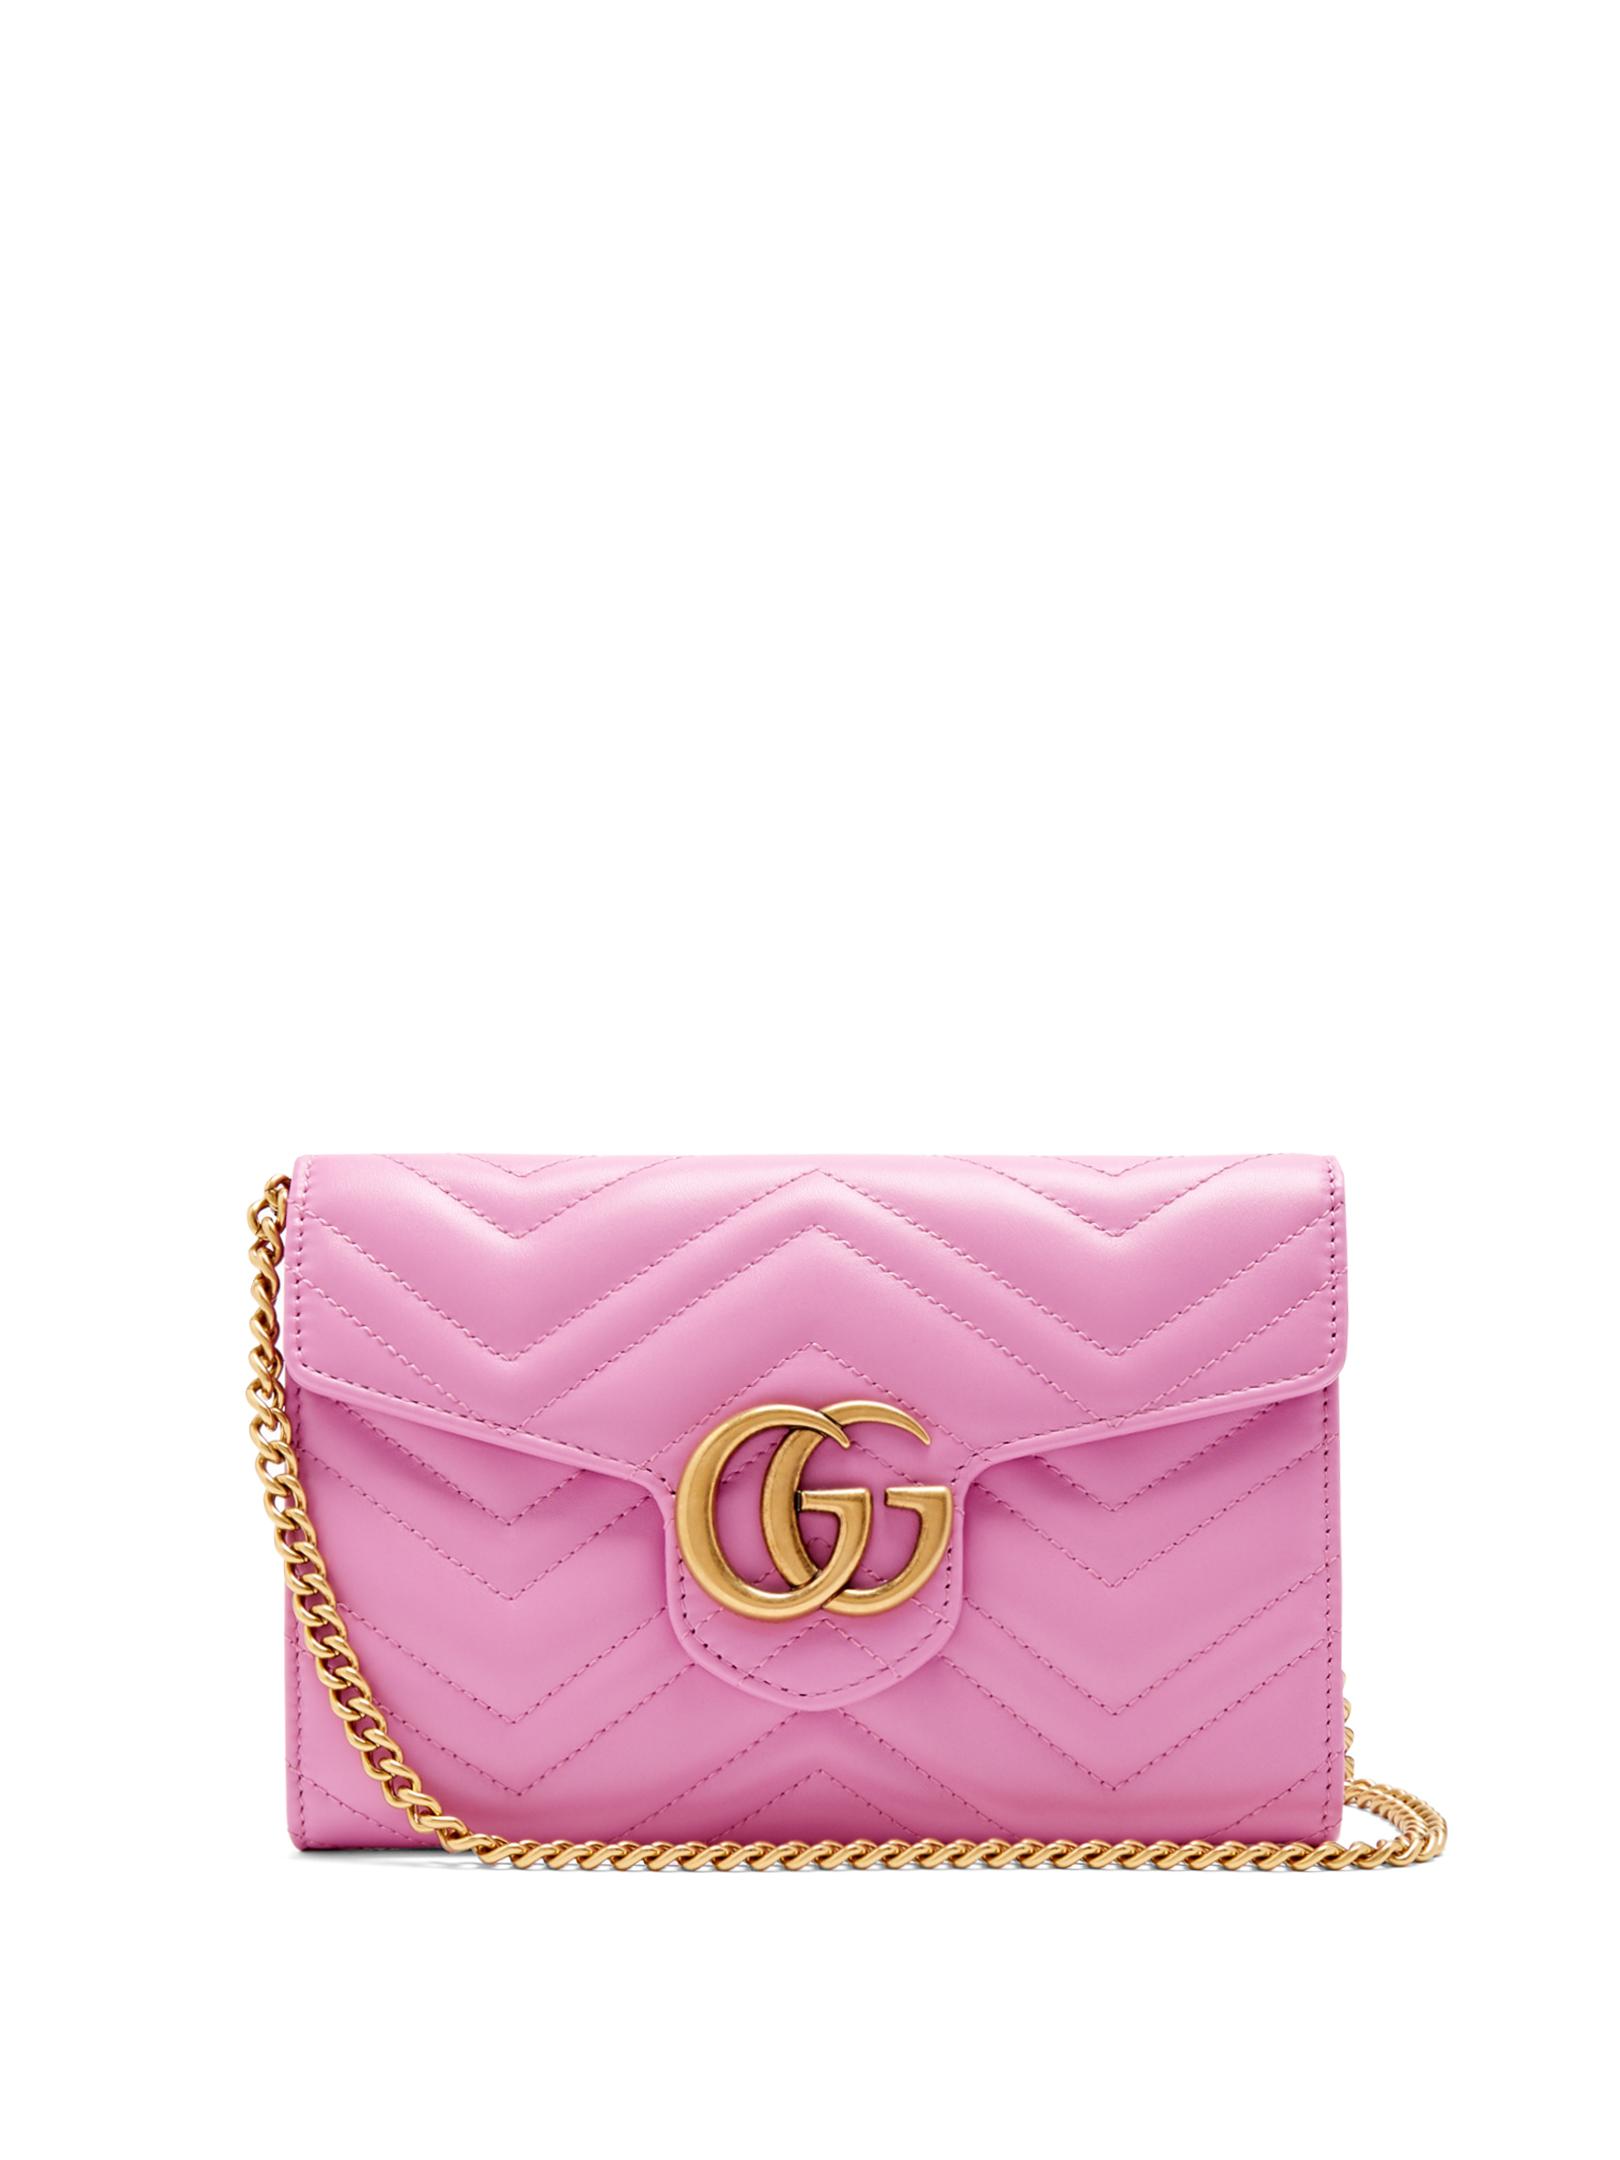 Lyst - Gucci GG Marmont Quilted-leather Cross-body Bag in Pink